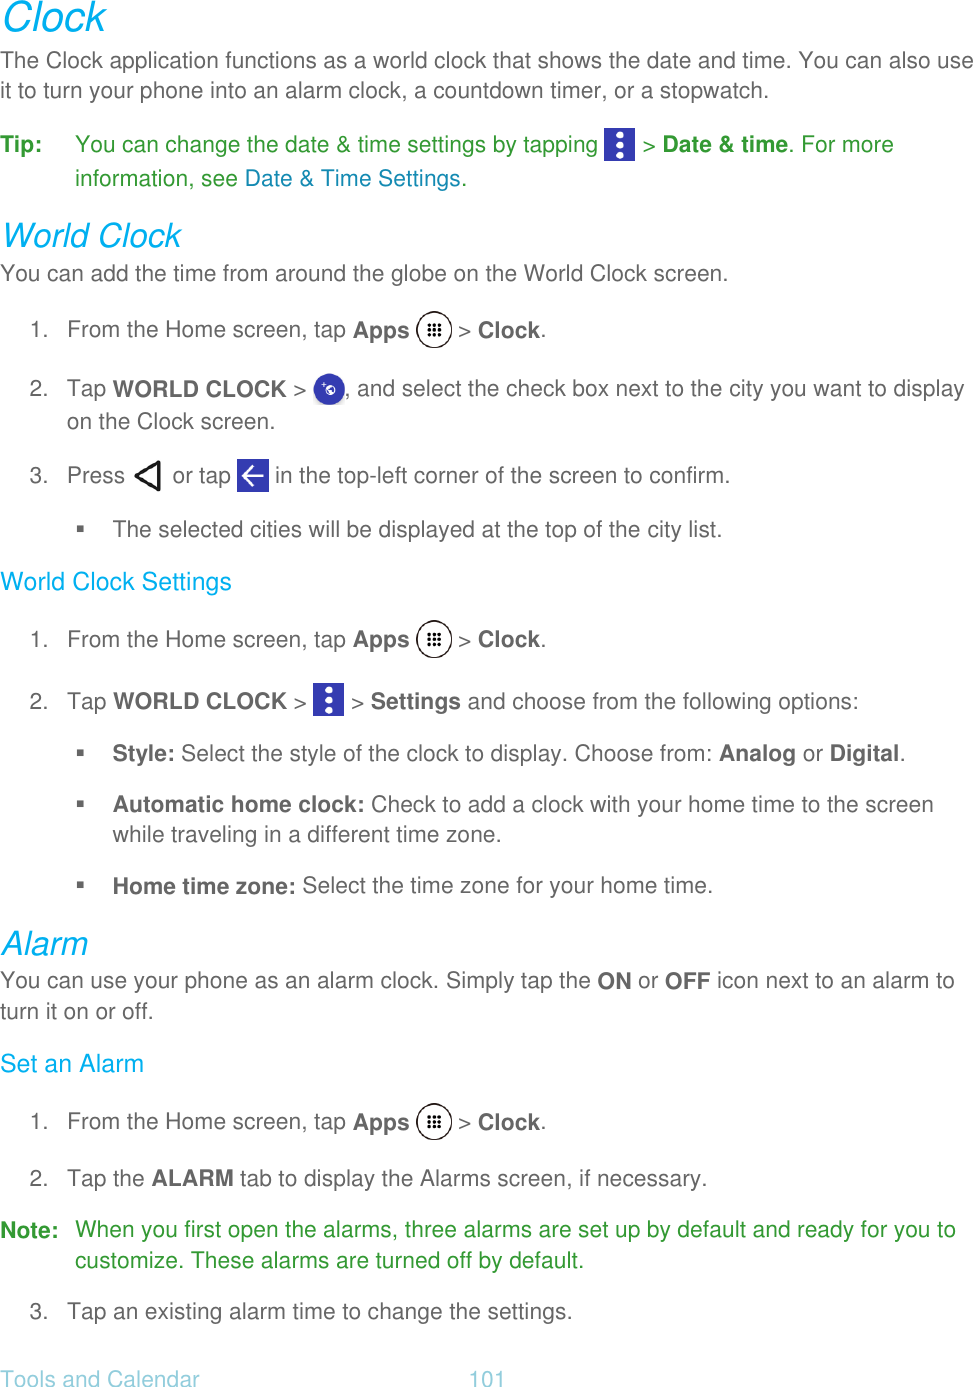 Tools and Calendar  101   Clock The Clock application functions as a world clock that shows the date and time. You can also use it to turn your phone into an alarm clock, a countdown timer, or a stopwatch. Tip: You can change the date &amp; time settings by tapping   &gt; Date &amp; time. For more information, see Date &amp; Time Settings. World Clock You can add the time from around the globe on the World Clock screen. 1.  From the Home screen, tap Apps   &gt; Clock. 2. Tap WORLD CLOCK &gt;  , and select the check box next to the city you want to display on the Clock screen. 3.  Press   or tap   in the top-left corner of the screen to confirm.    The selected cities will be displayed at the top of the city list. World Clock Settings 1.  From the Home screen, tap Apps   &gt; Clock. 2. Tap WORLD CLOCK &gt;   &gt; Settings and choose from the following options:  Style: Select the style of the clock to display. Choose from: Analog or Digital.  Automatic home clock: Check to add a clock with your home time to the screen while traveling in a different time zone.  Home time zone: Select the time zone for your home time. Alarm You can use your phone as an alarm clock. Simply tap the ON or OFF icon next to an alarm to turn it on or off. Set an Alarm 1.  From the Home screen, tap Apps   &gt; Clock. 2. Tap the ALARM tab to display the Alarms screen, if necessary. Note:  When you first open the alarms, three alarms are set up by default and ready for you to customize. These alarms are turned off by default. 3. Tap an existing alarm time to change the settings. 